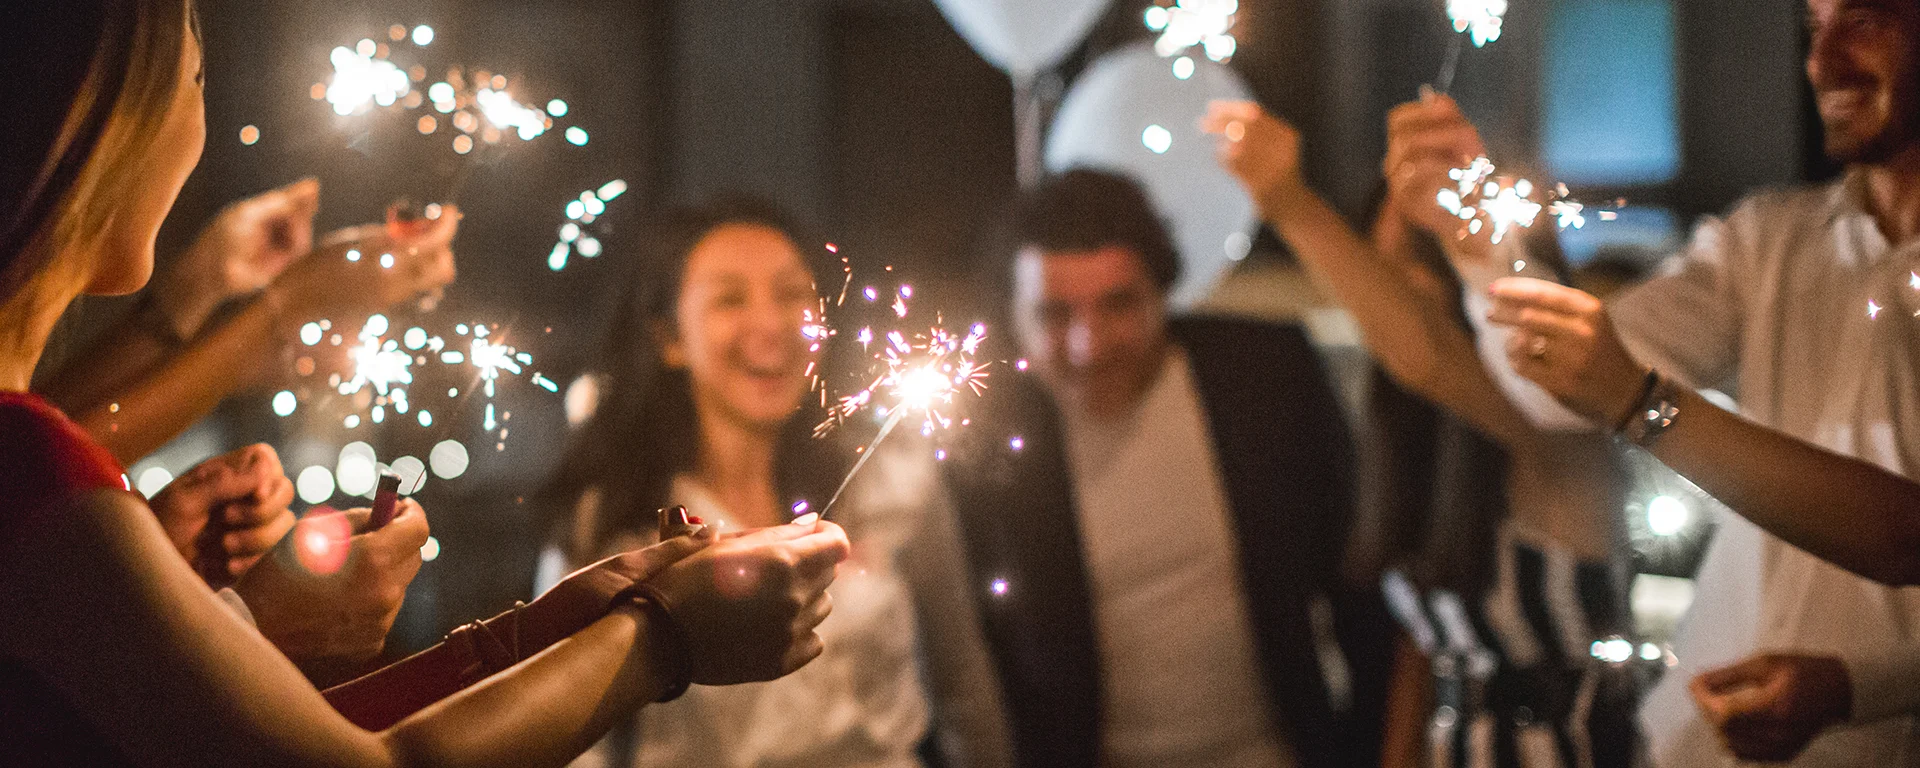 Group of people together, holding sparklers